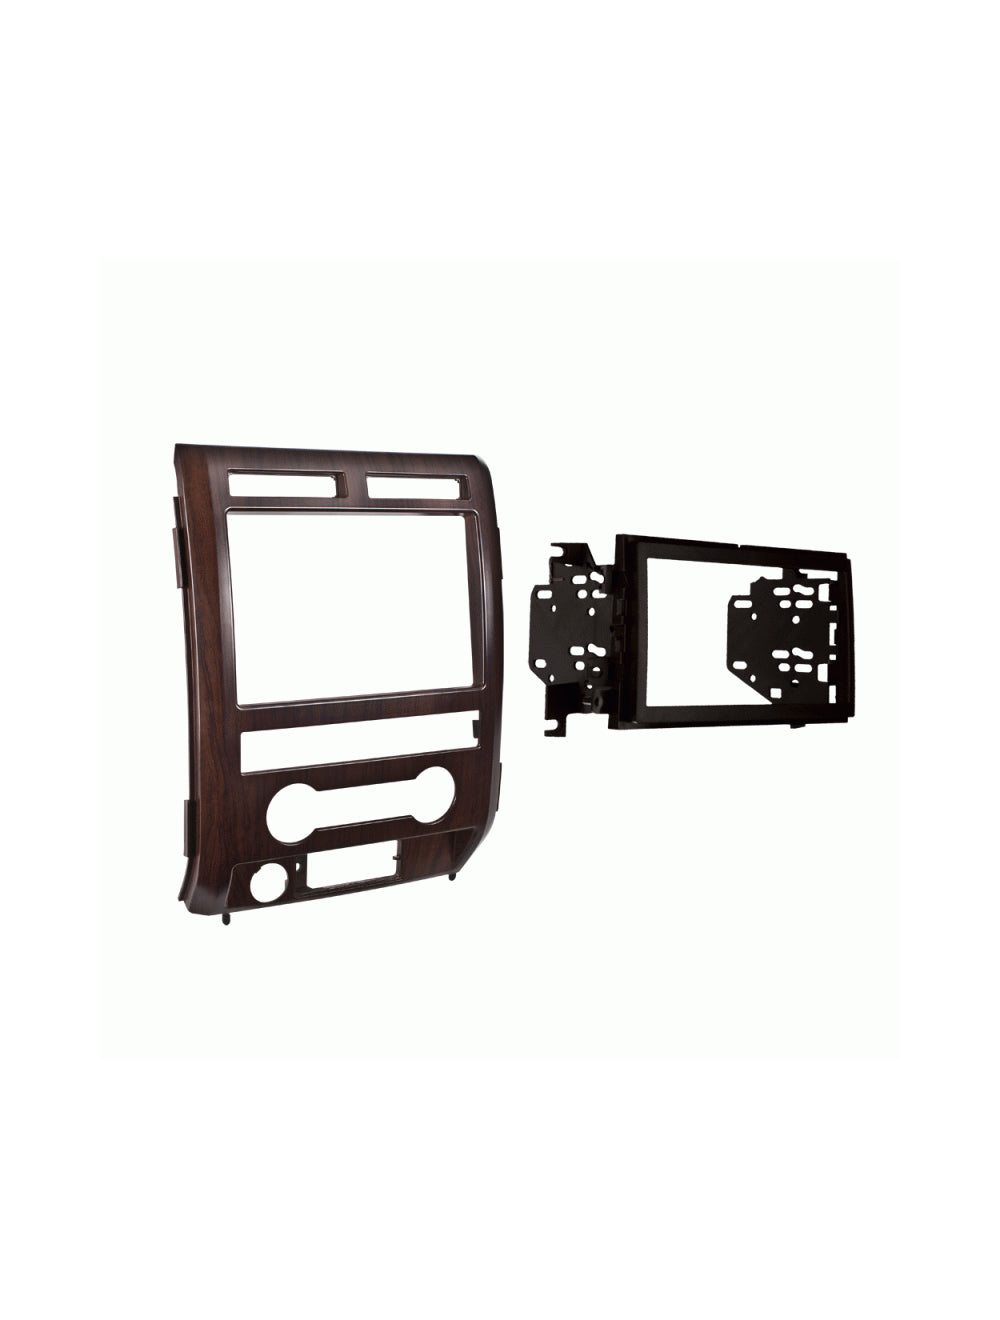 Metra 95-5822AS Double DIN Installation Dash Kit for 2009-2010 Ford F-150 Platinum Non NAV Equipped Models